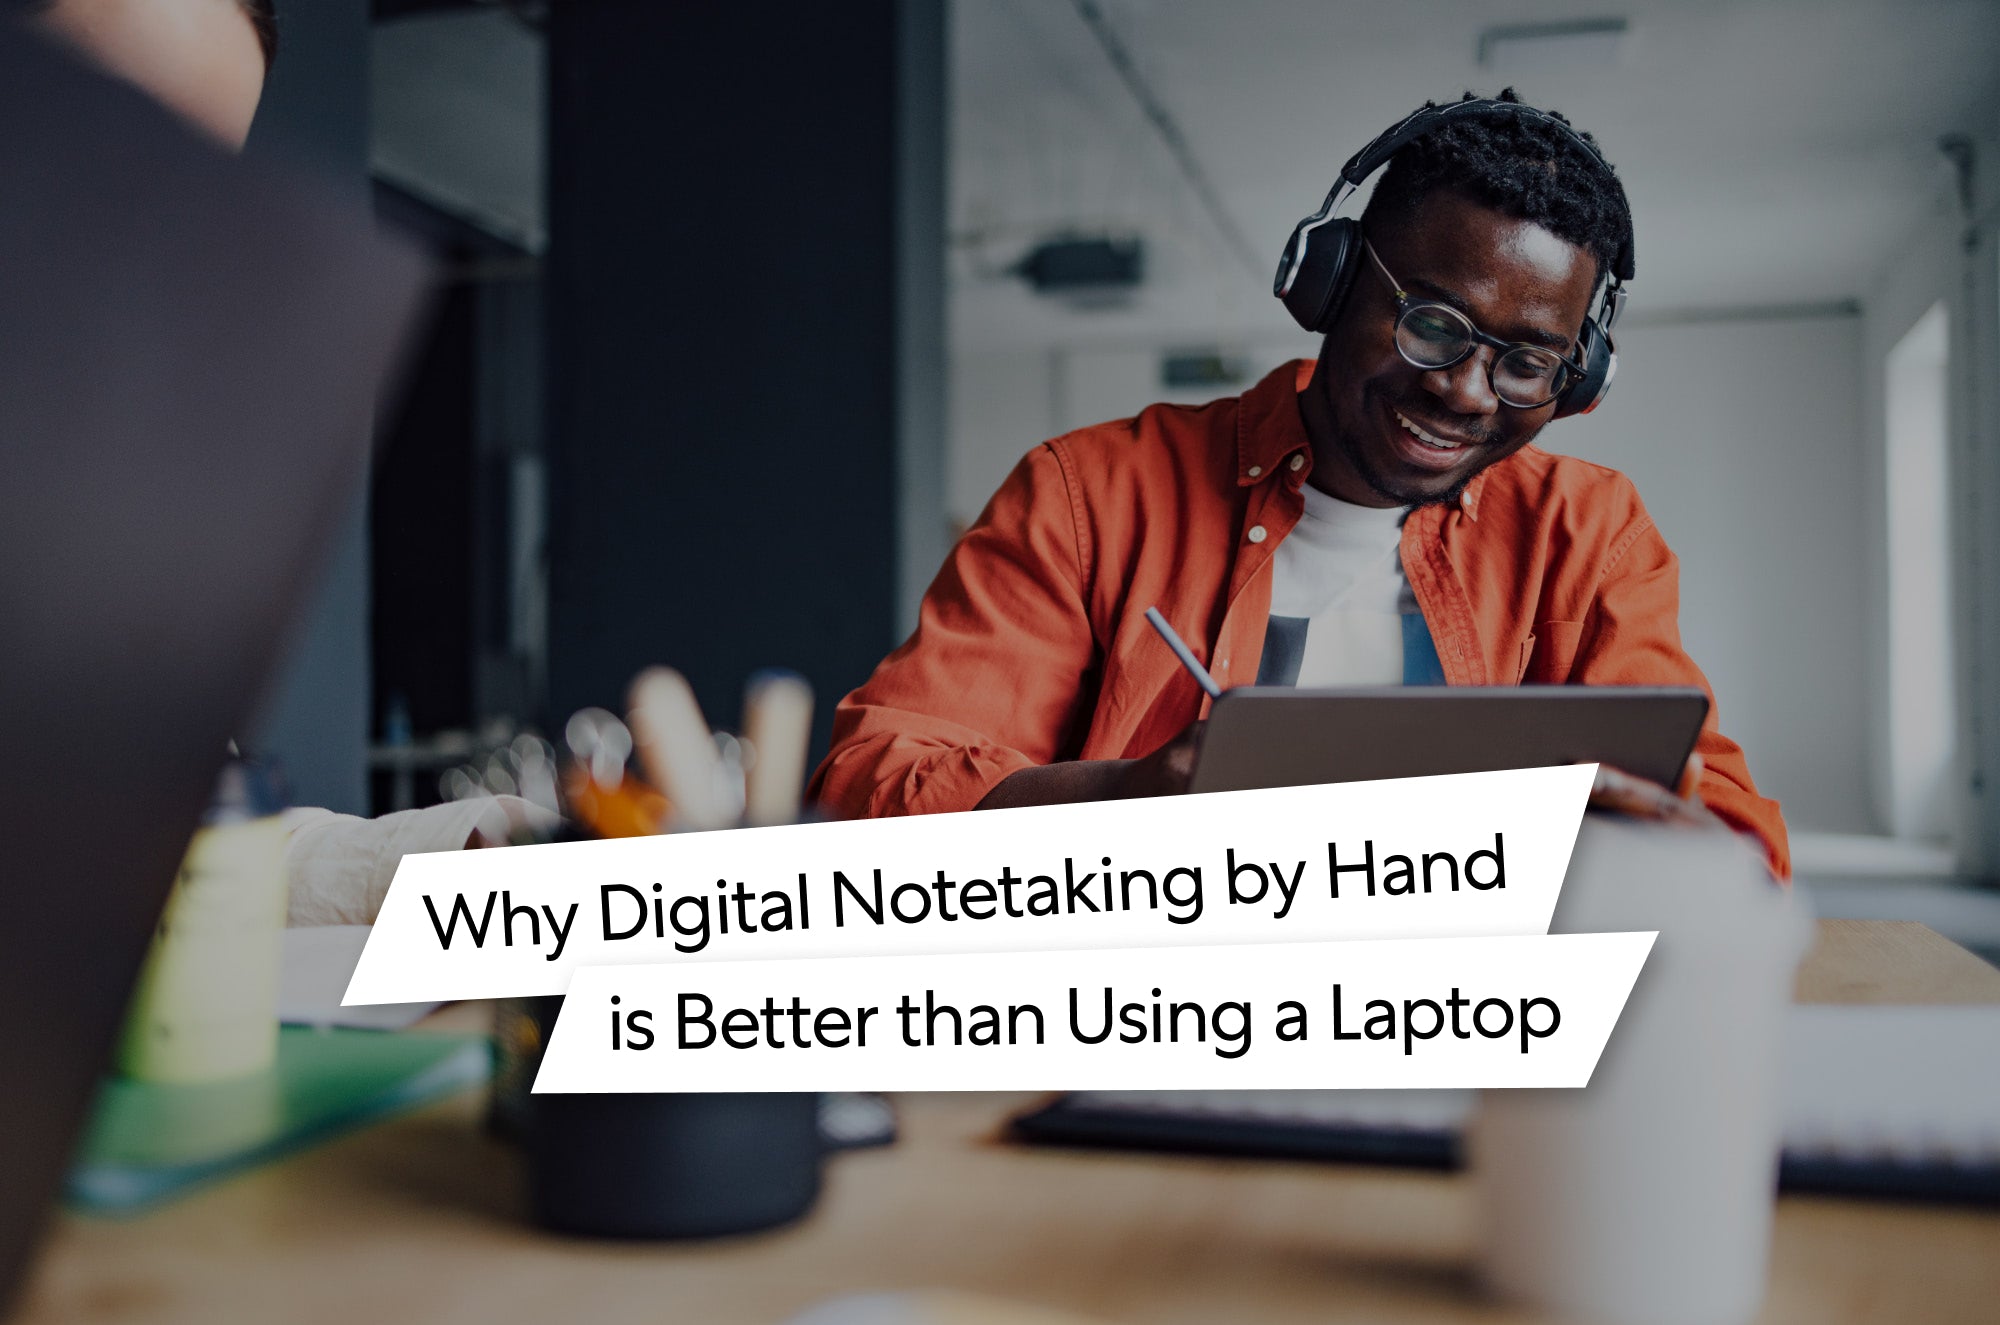 Why Digital Notetaking by Hand is Better than Using a Laptop